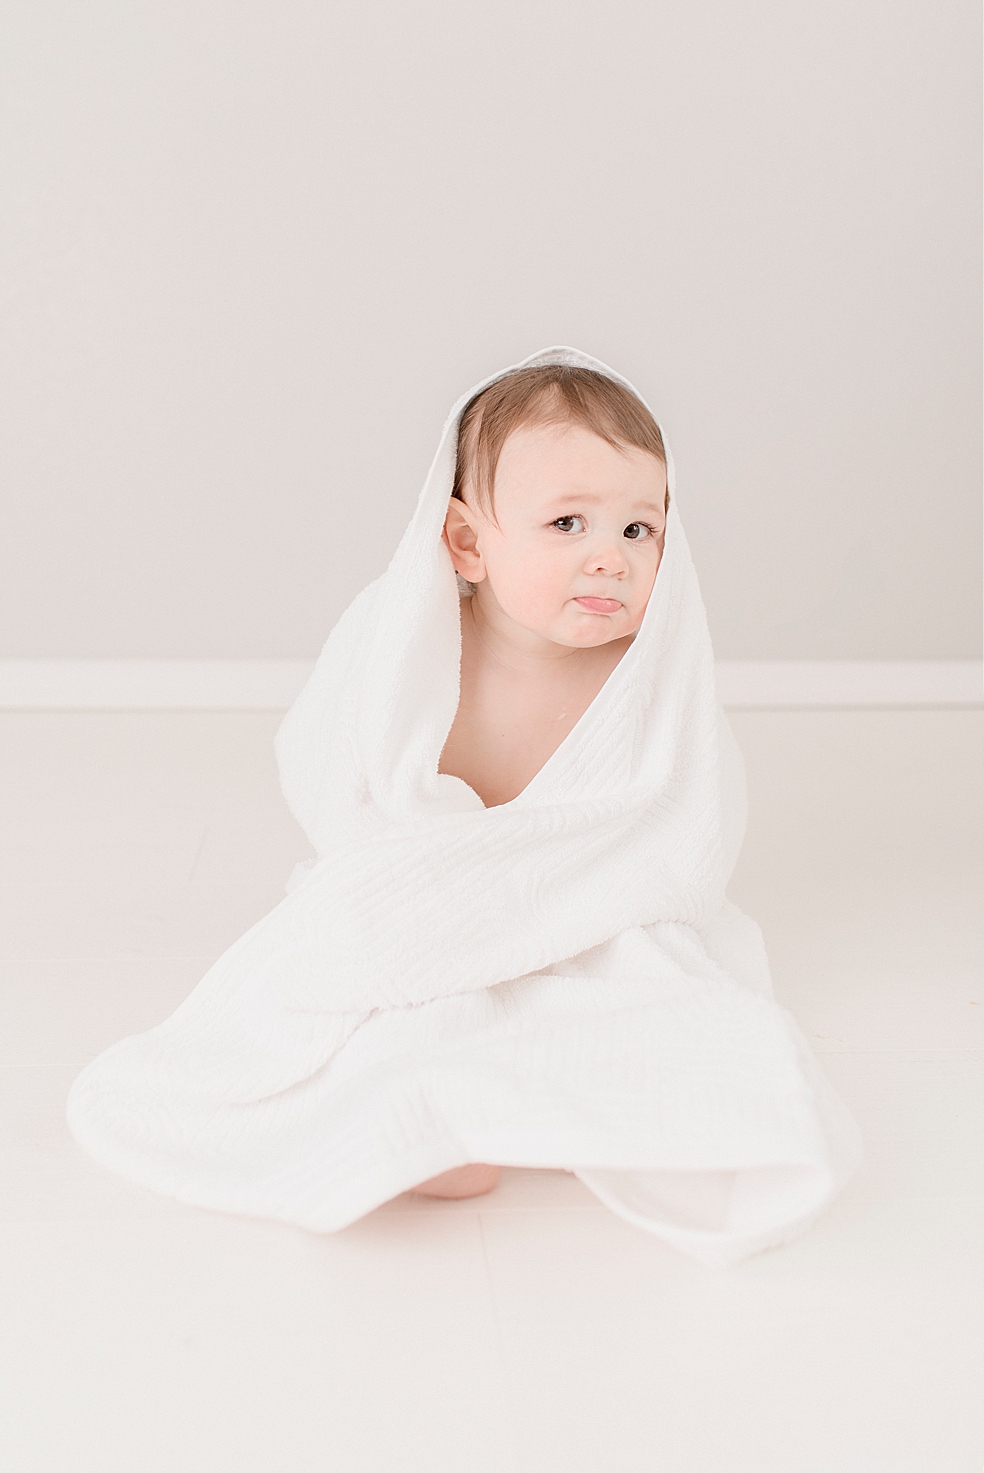 Baby boy in white towel making faces at the camera | Photo by Jessica Lee Photography